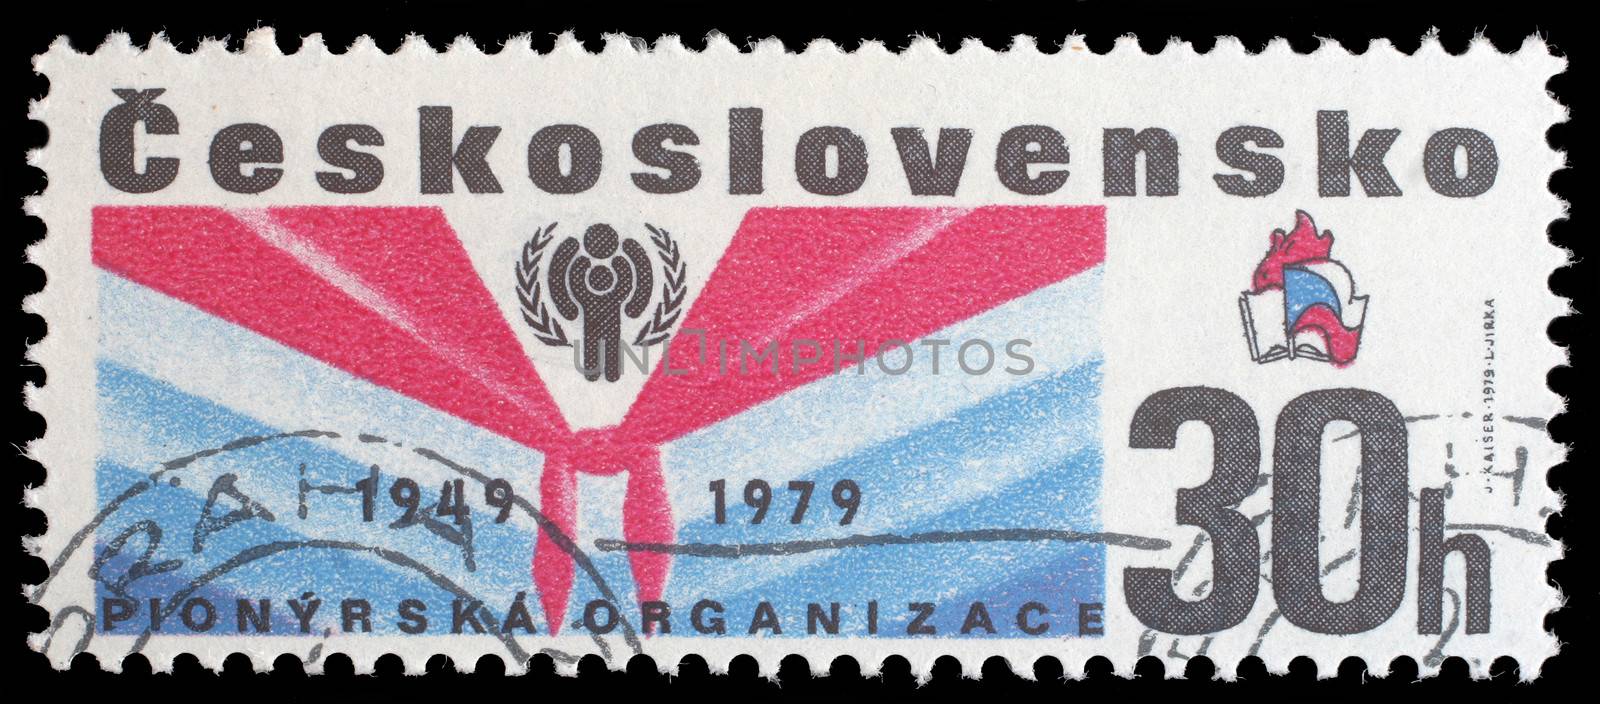 CZECHOSLOVAKIA - CIRCA 1979 a stamp from Czechoslovakia shows image commemorating the 30th anniversary of the Pioneer movement for children in Czechoslovakia, circa 1979